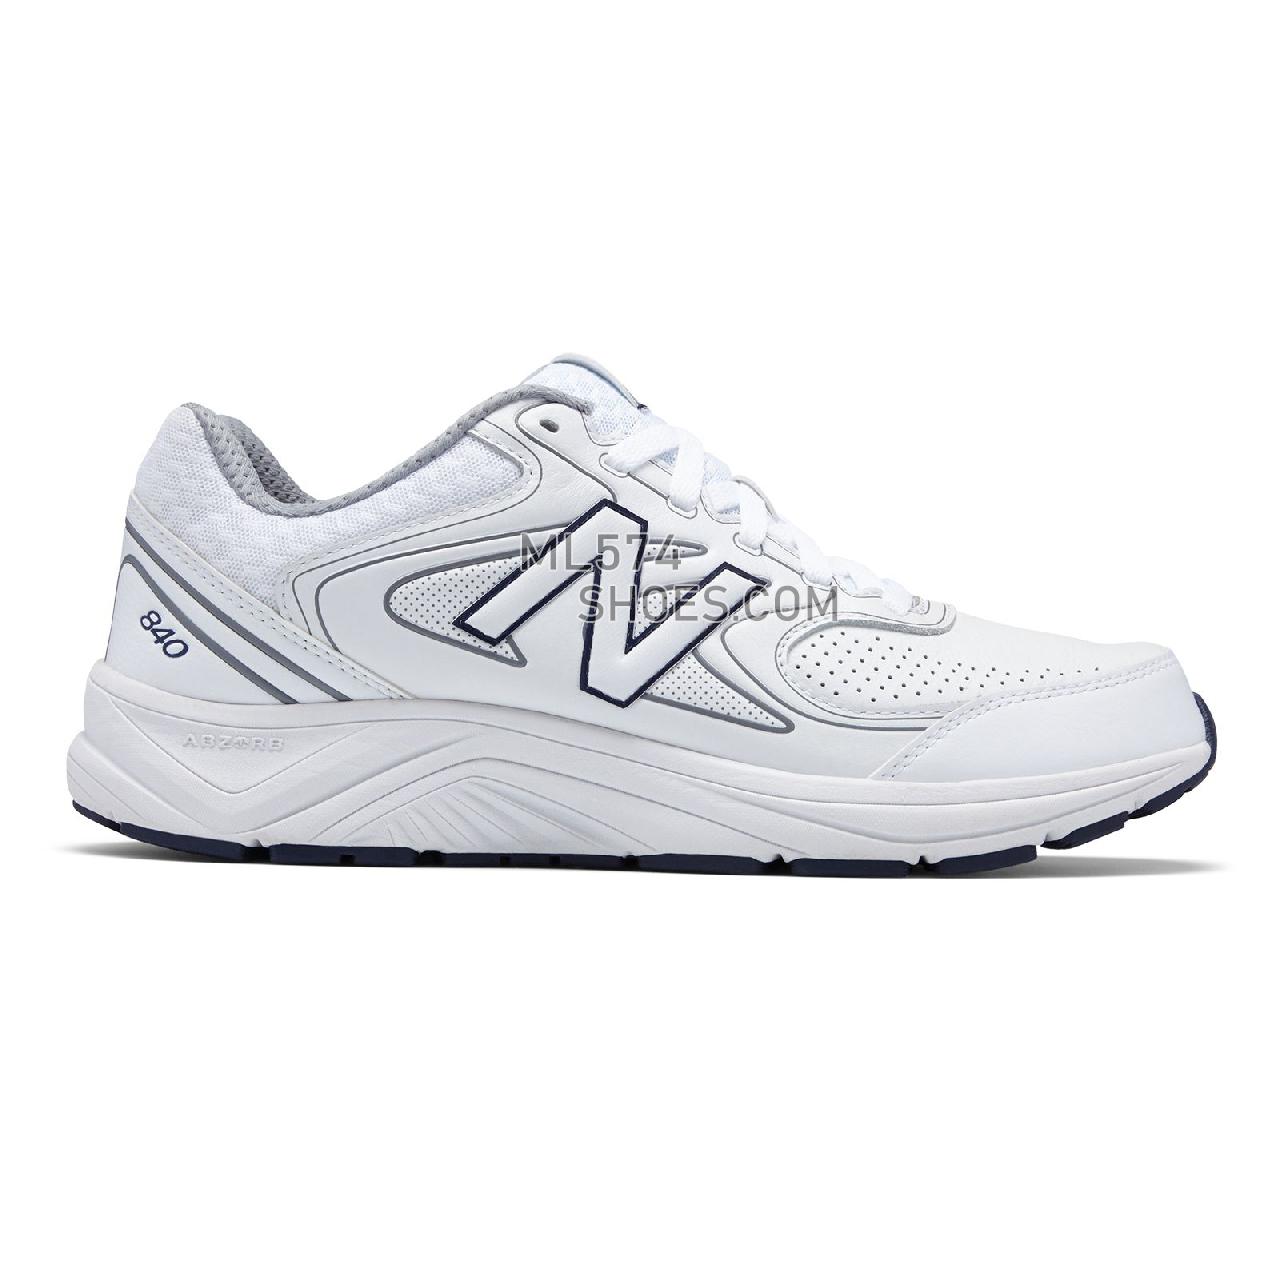 New Balance 840v2 - Men's 840 - Walking White with Navy and Grey - MW840WT2